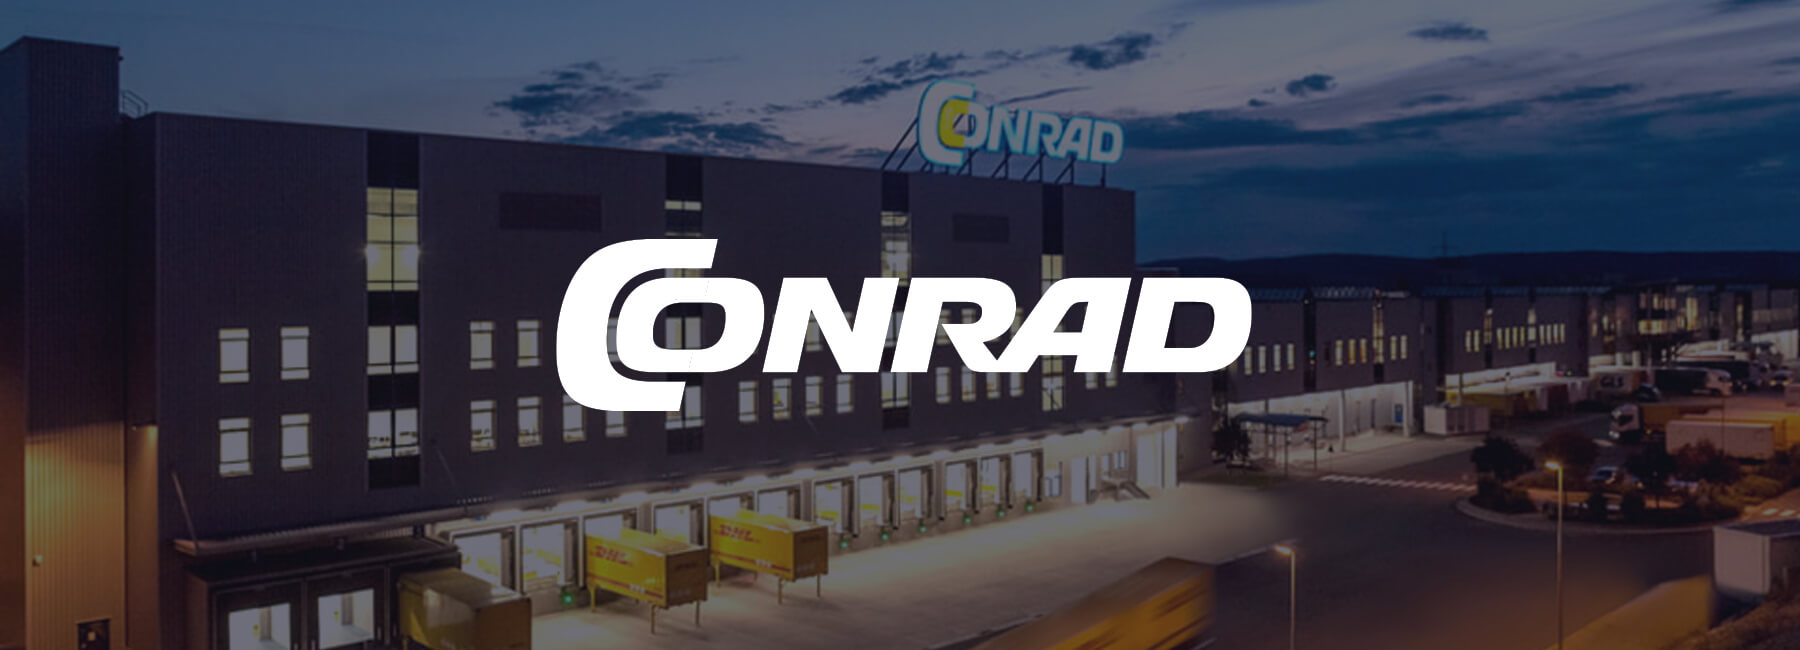 Conrad stays ahead of the curve with Mopinion feedback